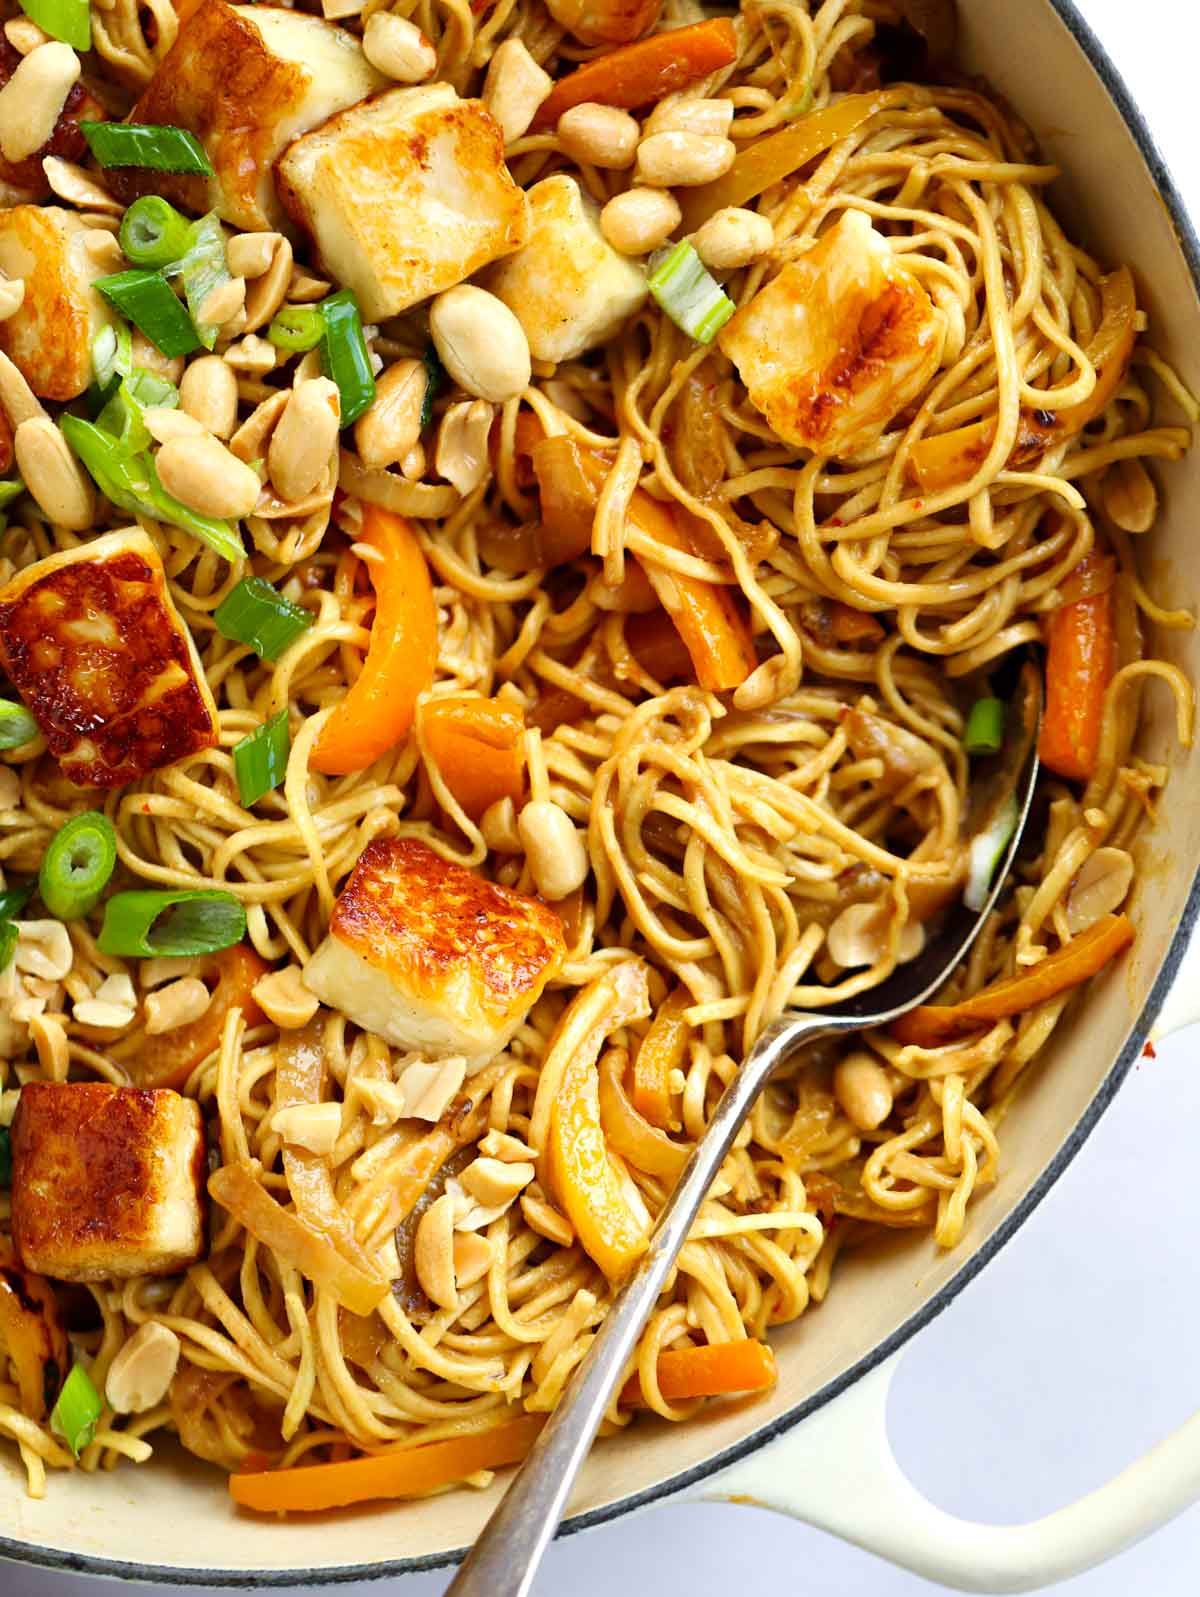 A fork in a big pan of noodles with halloumi and satay sauce for Peanut Butter Noodles.